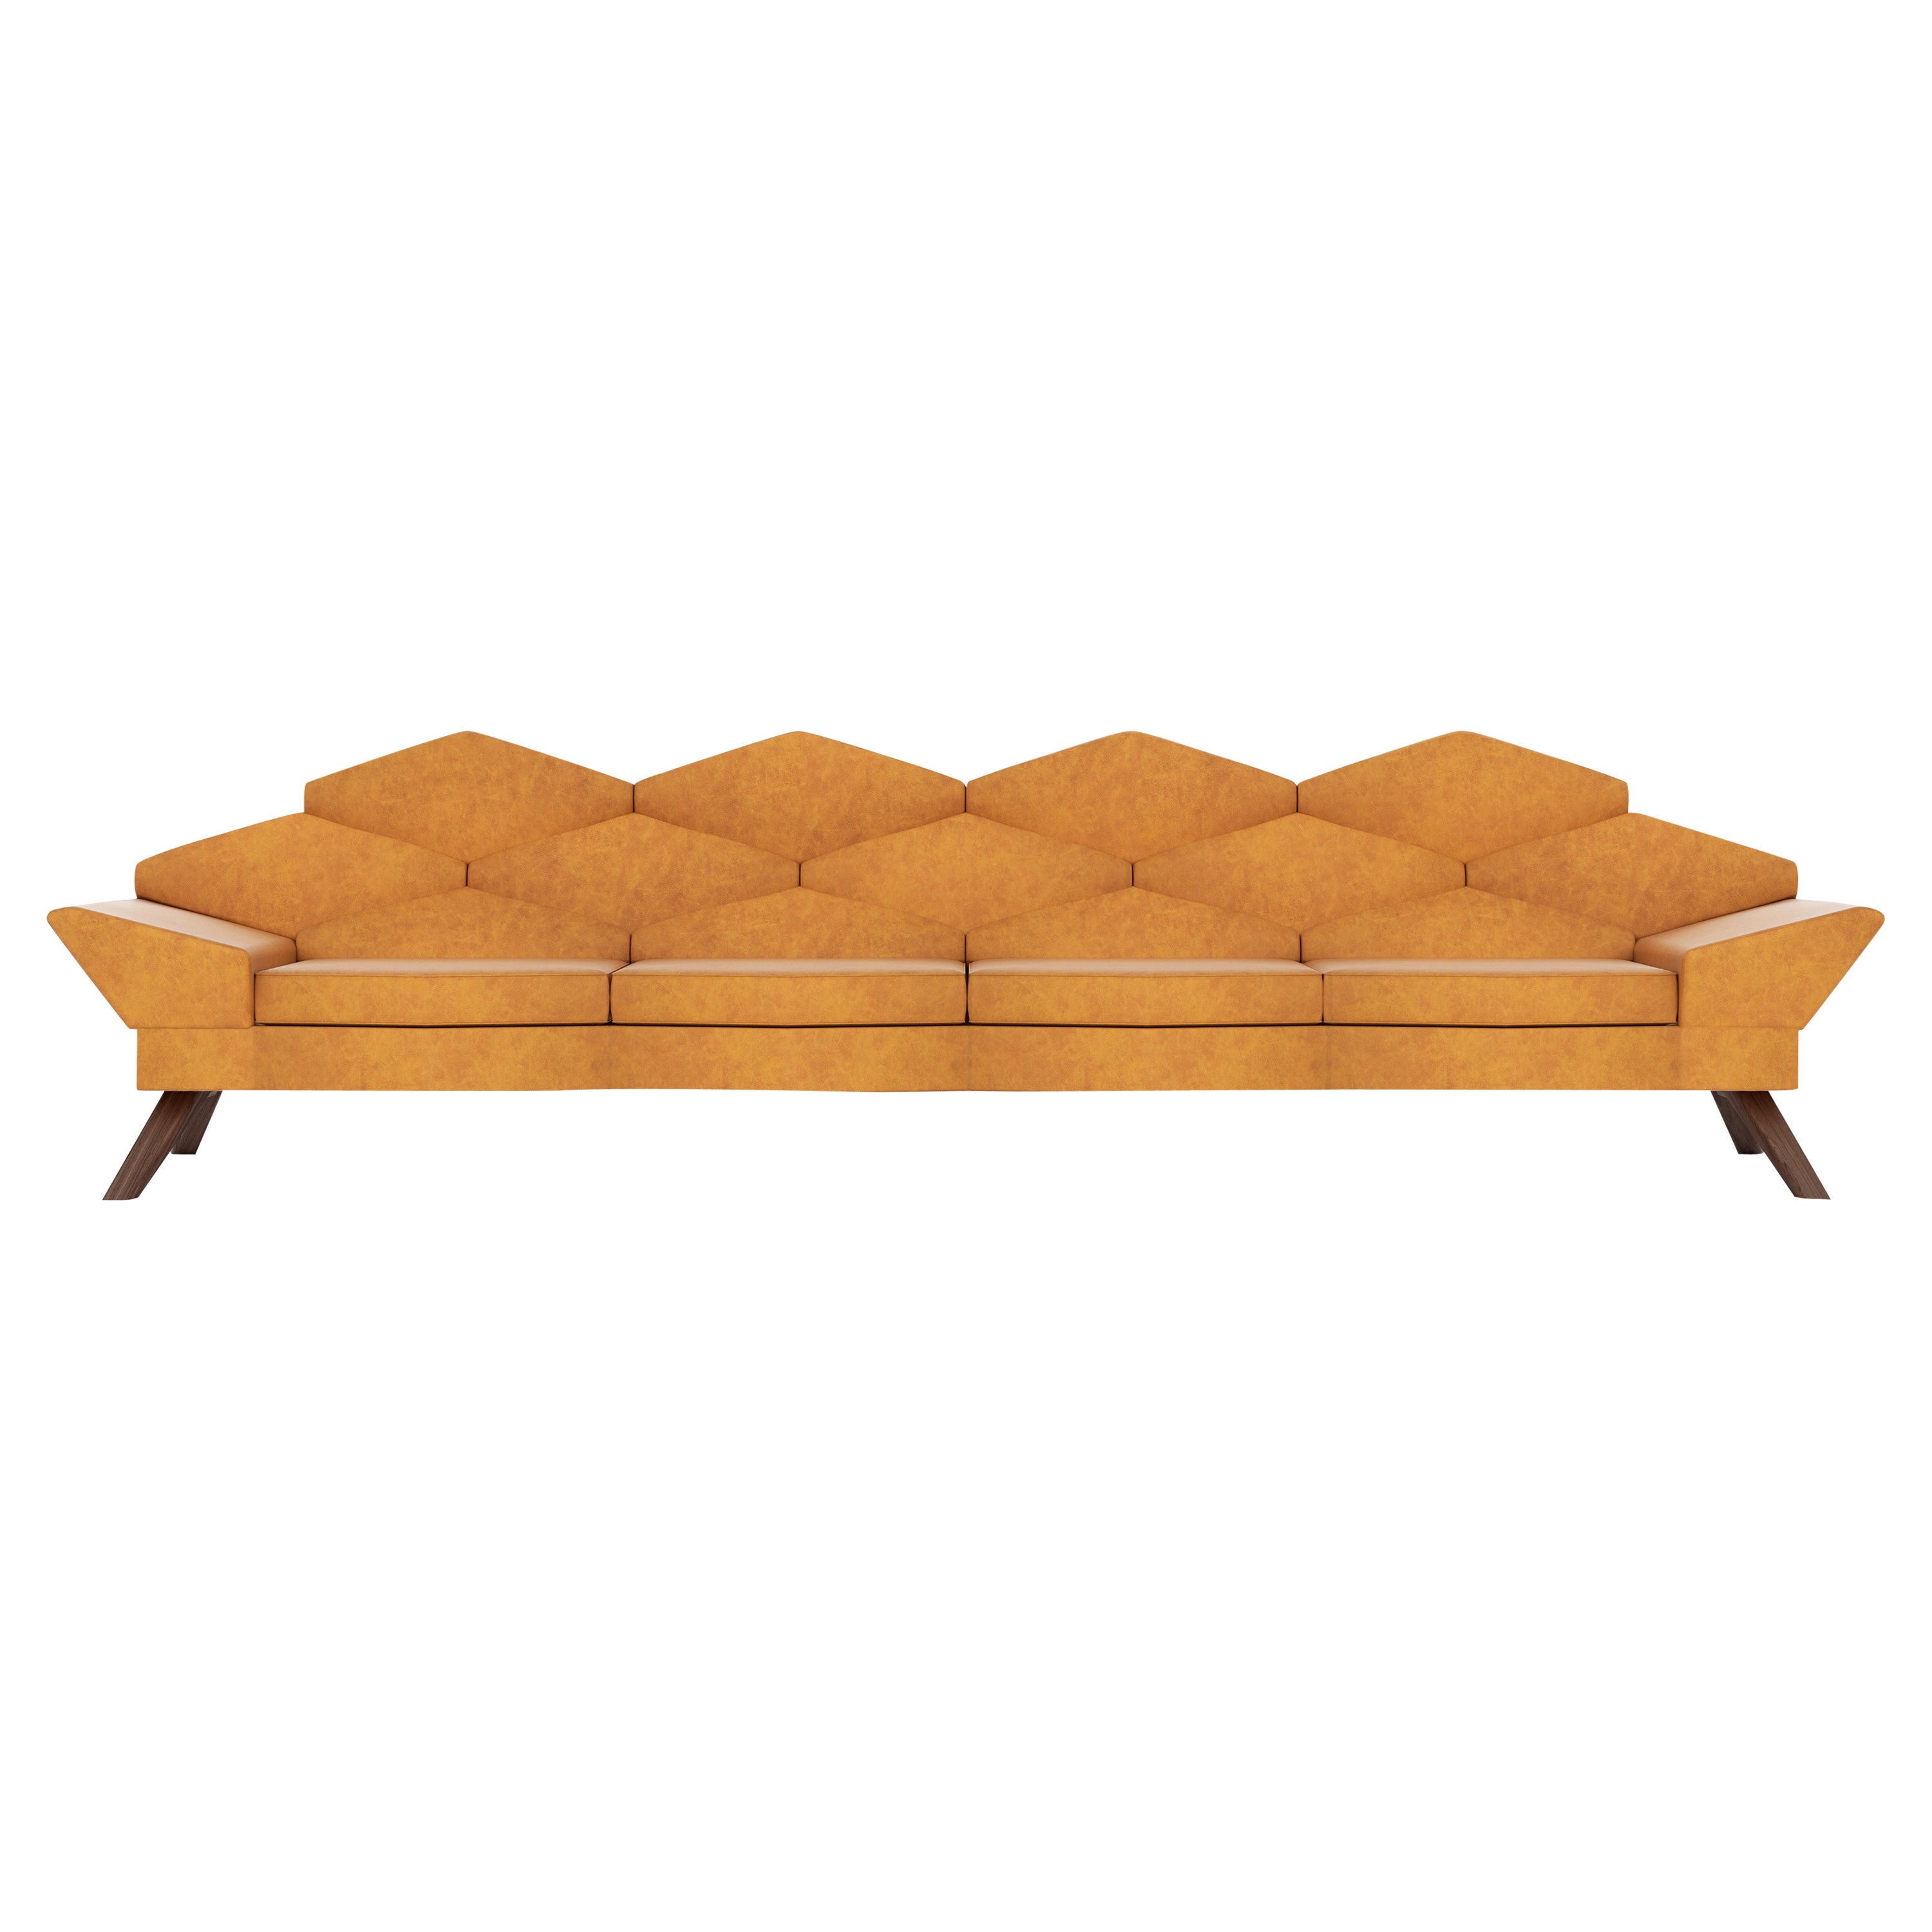 Hive Sofa in Camel Natural Leather by AROUNDtheTREE For Sale